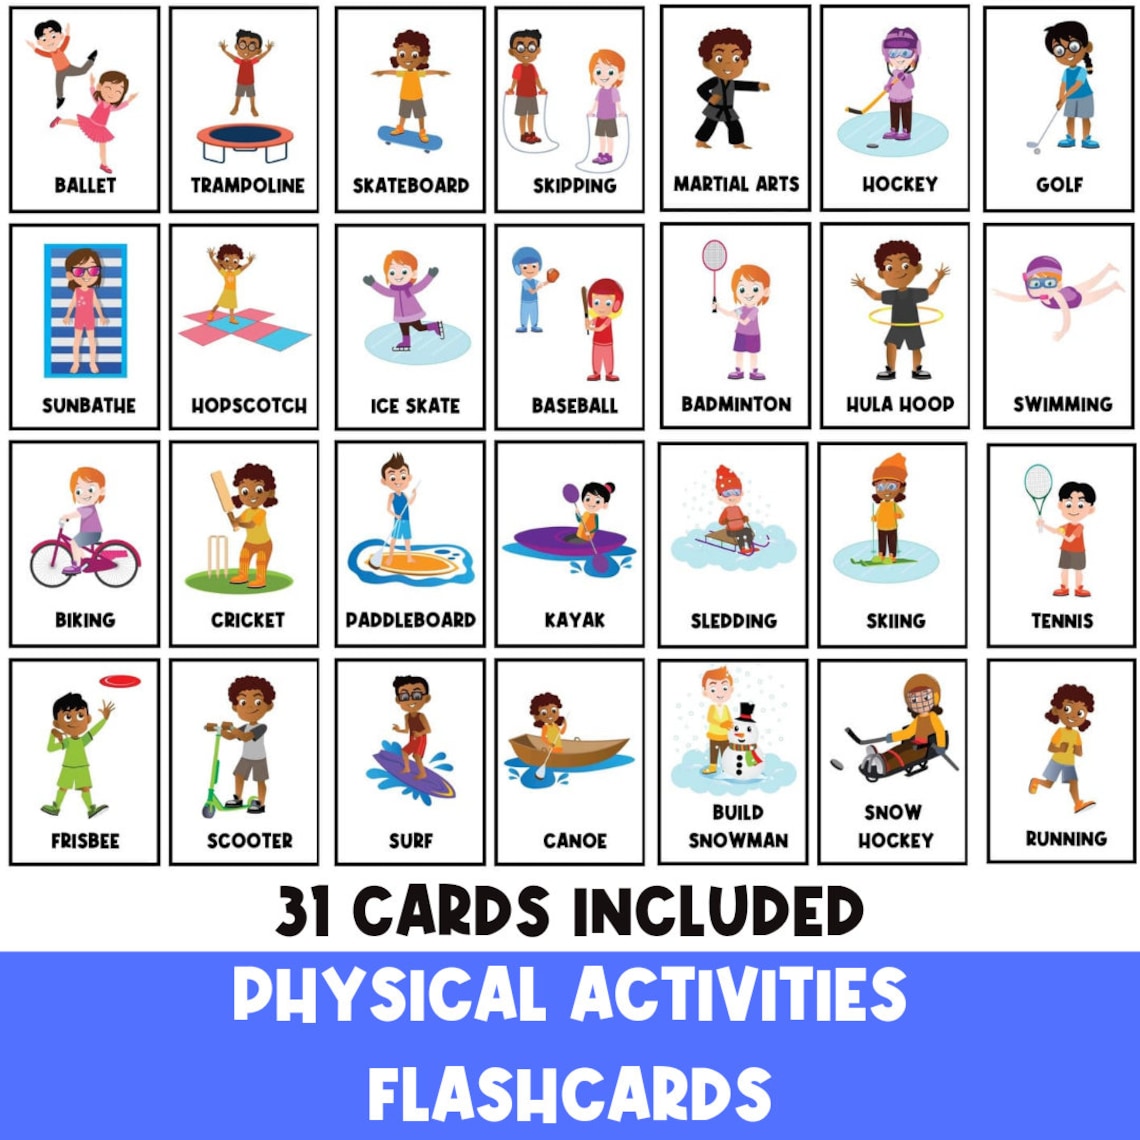 sports-fitness-flashcards-kids-exercises-flash-cards-for-etsy